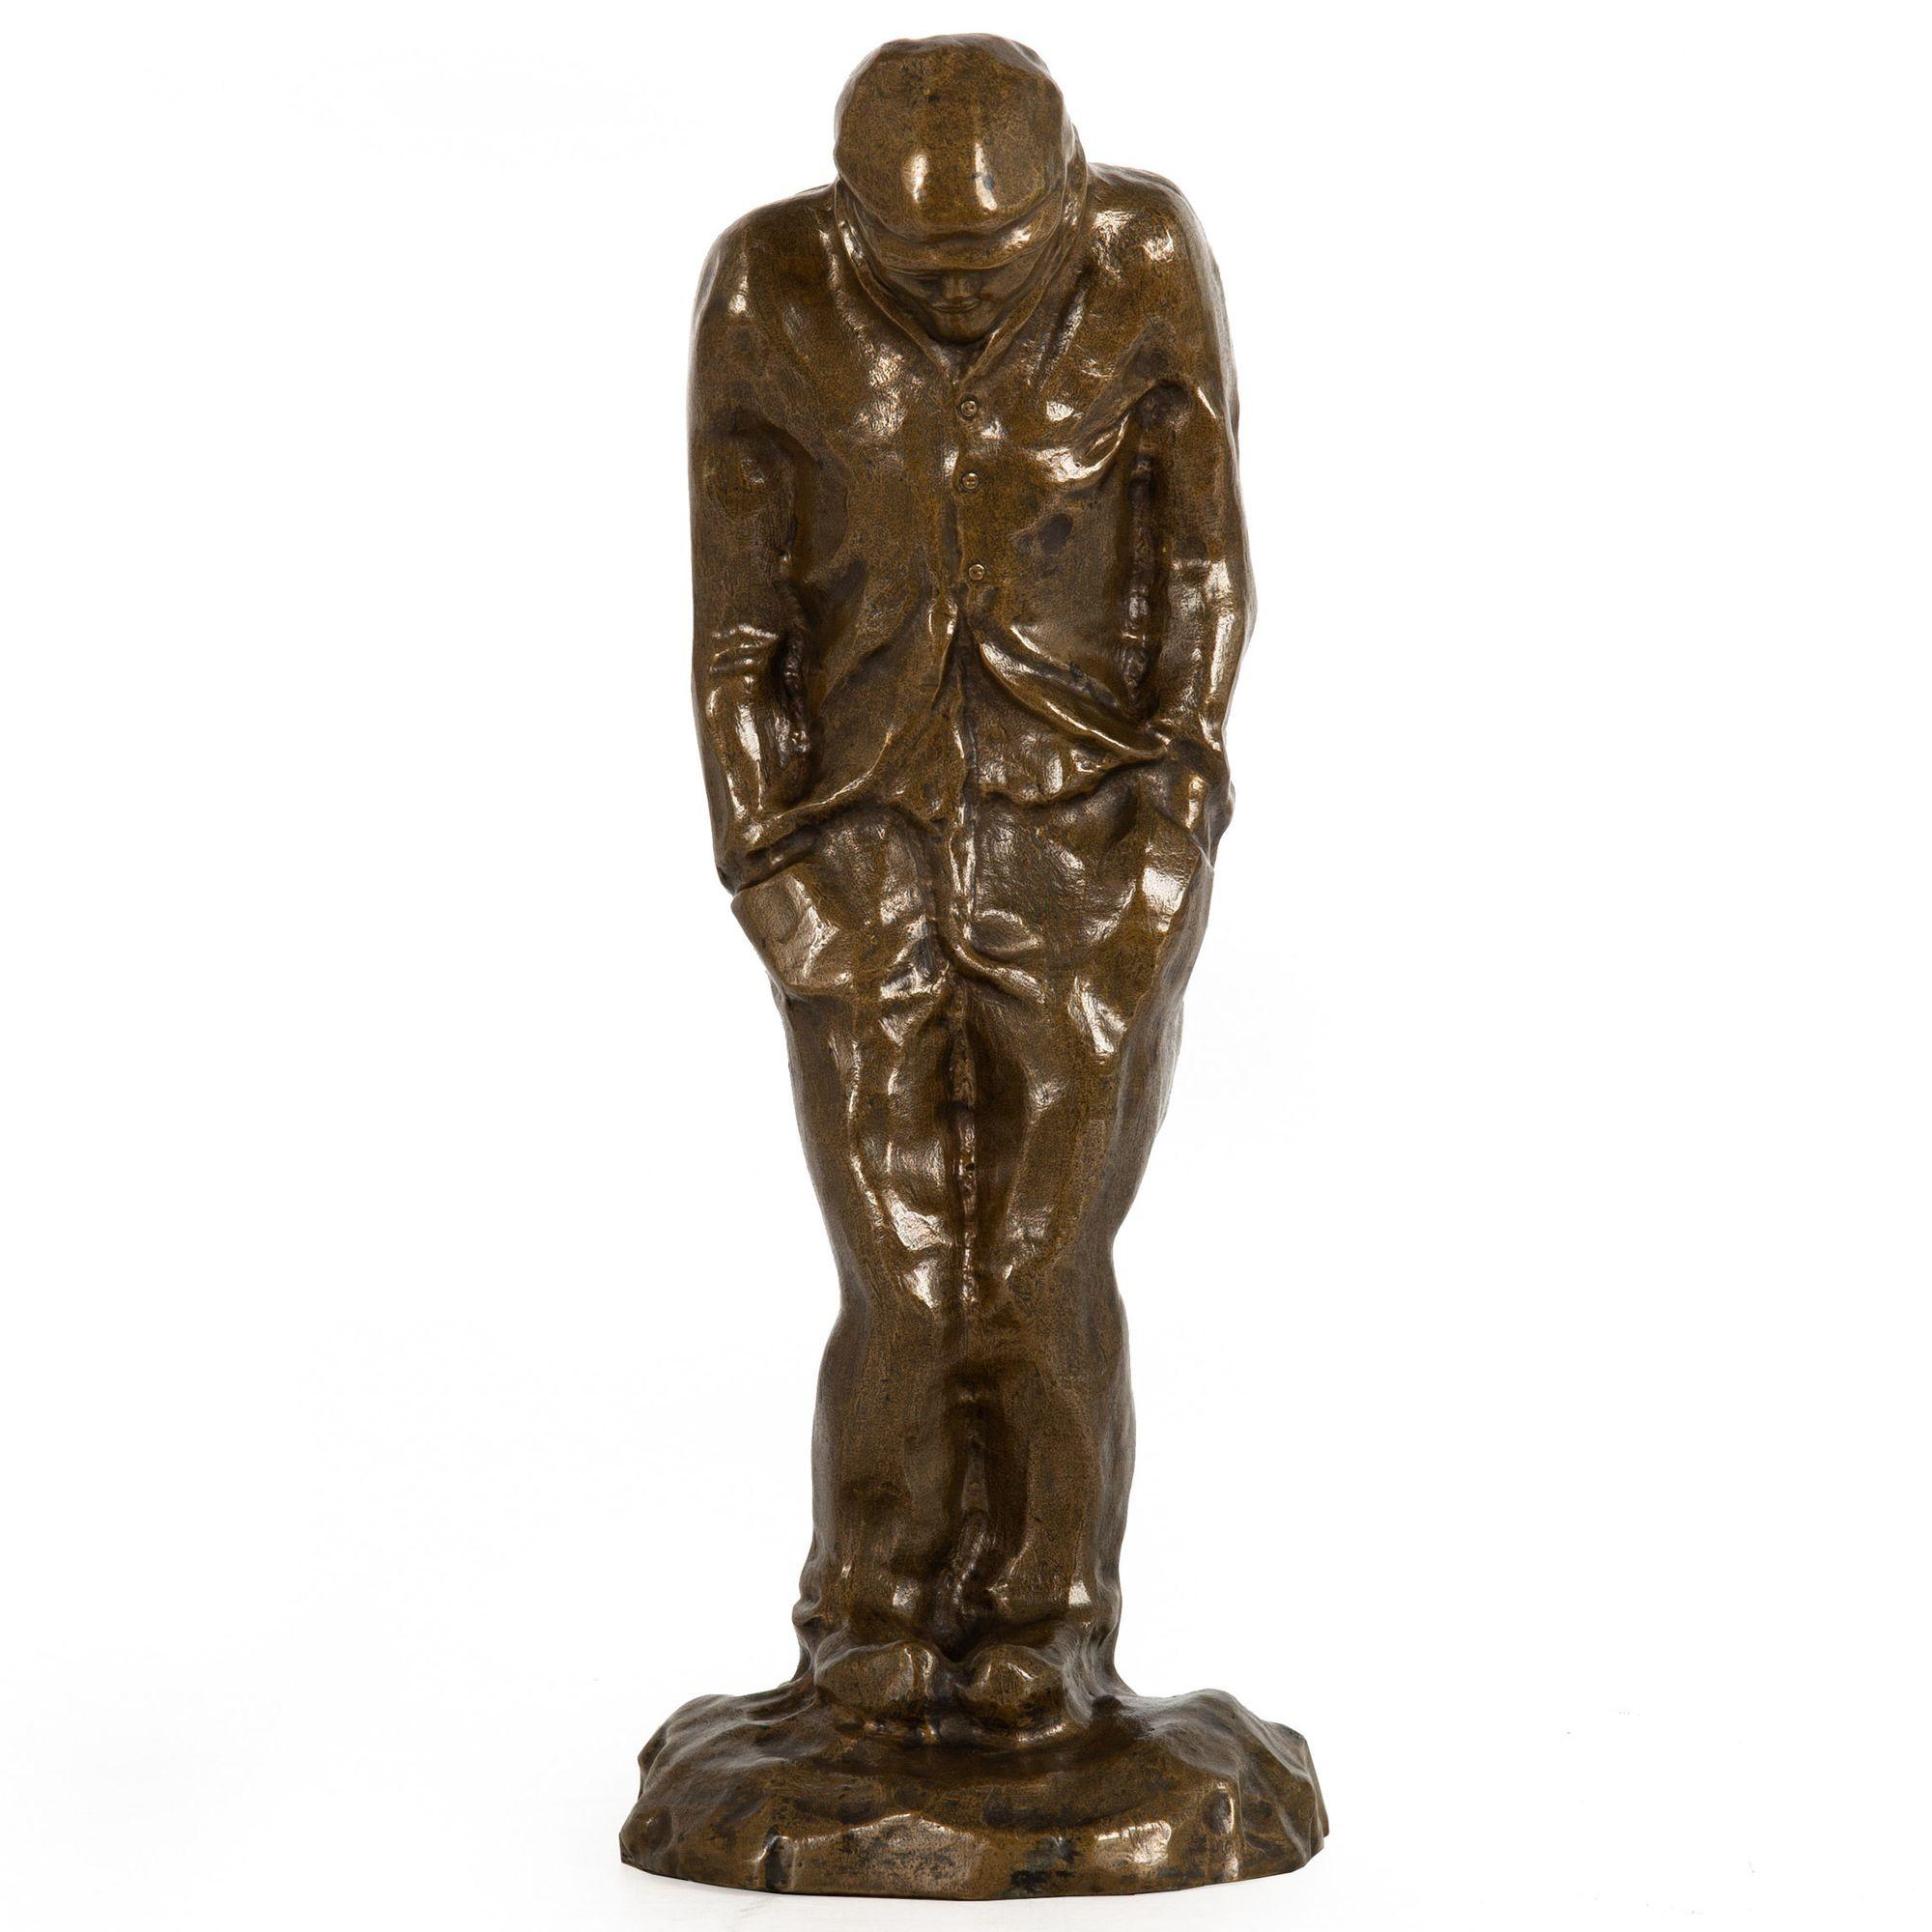 MANNER OF CONSTANTIN MEUNIER [French, 1831-1905]

A Shivering Worker

Sand-cast patinated bronze  signed to the base 